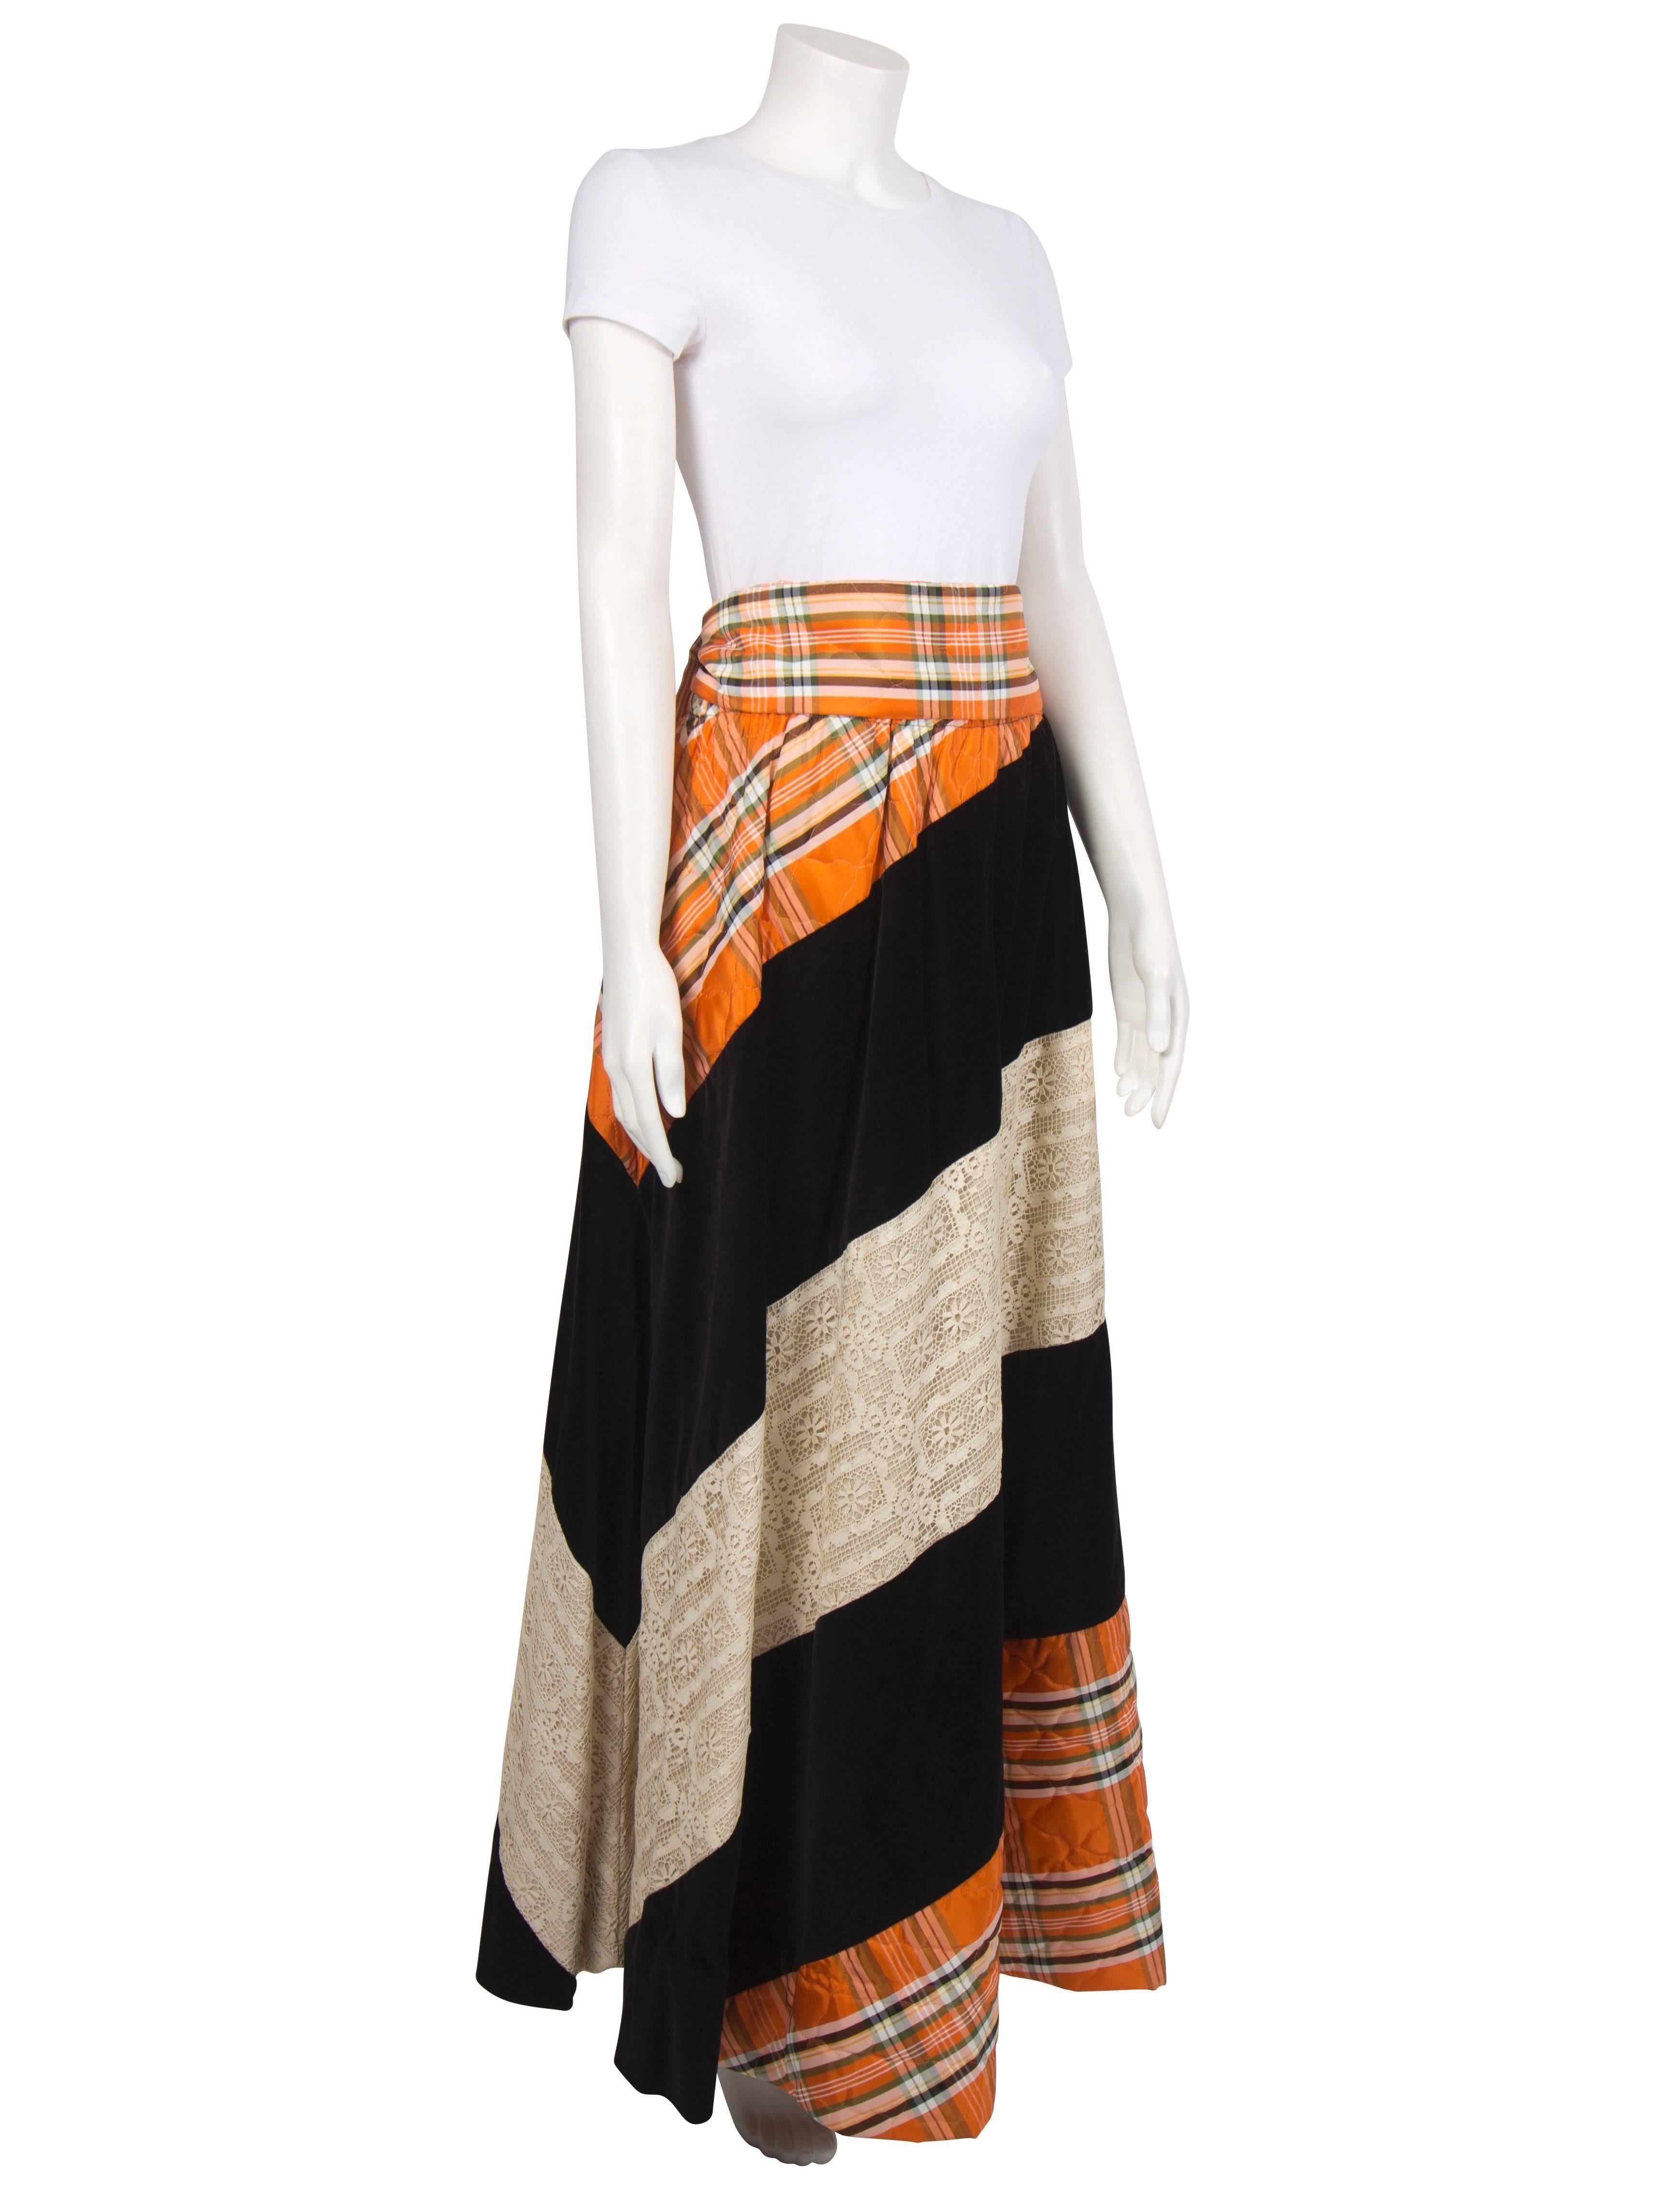 A beautiful example of Chessa Davis's signature patchwork designs, this skirt is made from diagonal panels of black velvet, cotton lace and a quilted plaid in orange and green. The skirt is lined  in soft cotton and has an elasticated waist. A wide